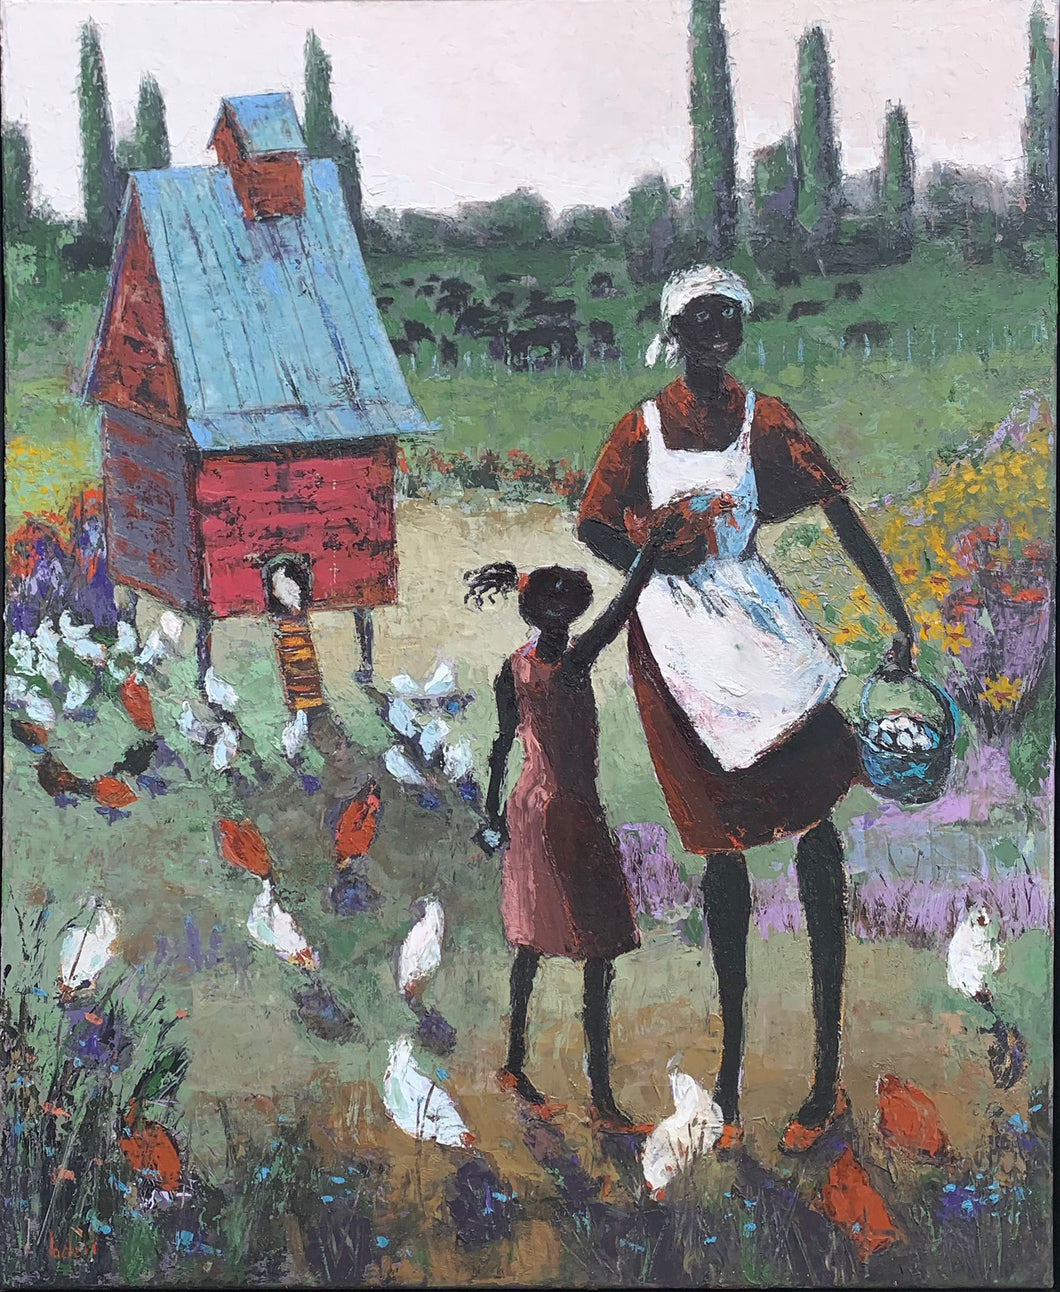 A Woman and Child Feeding Chickens by Arlene La Dell Hayes